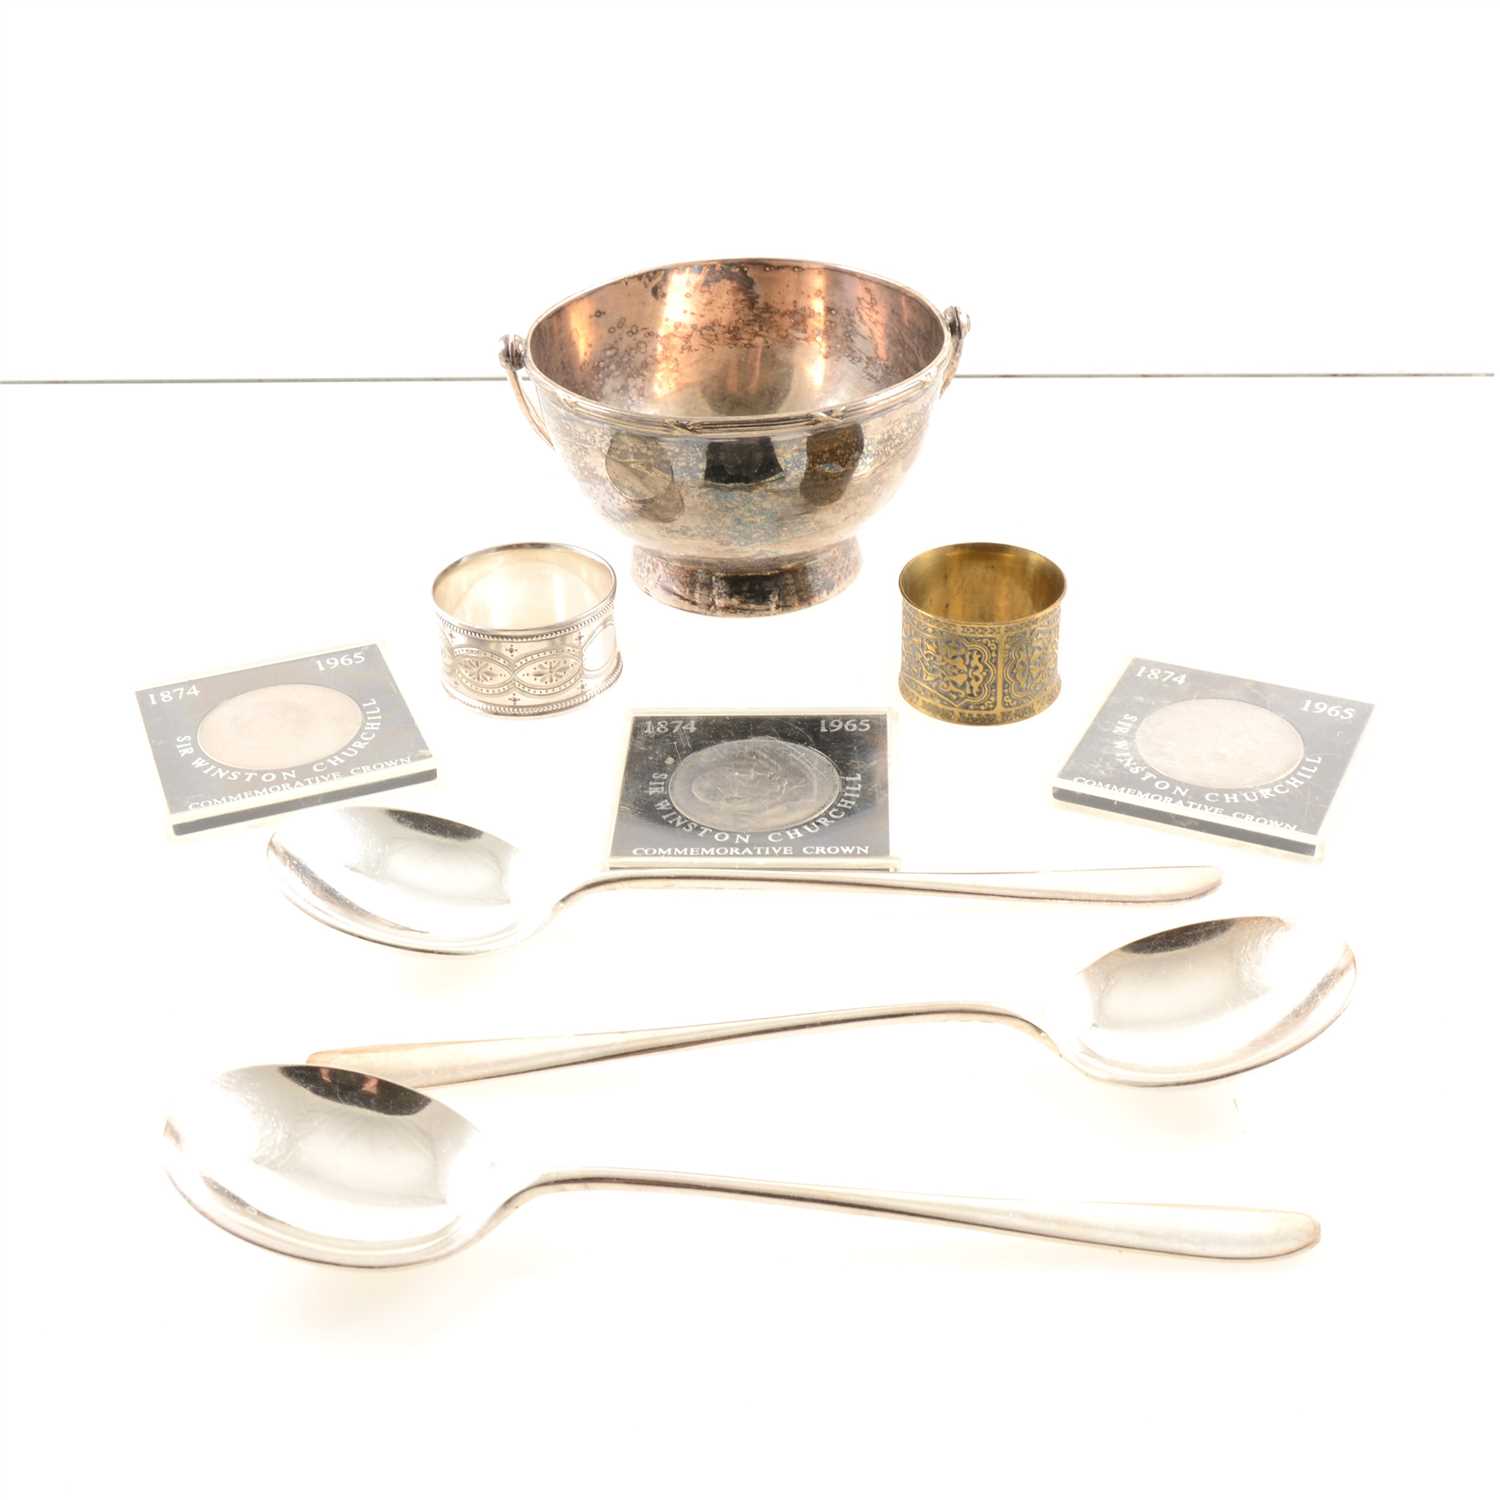 Lot 225 - Silver-plated flatware mainly by Walker & Hall, commemorative crowns, pre decimal coins, presentation packs from Denmark, Iceland, and the USSR, reproduction Roman coins, some paper money etc.